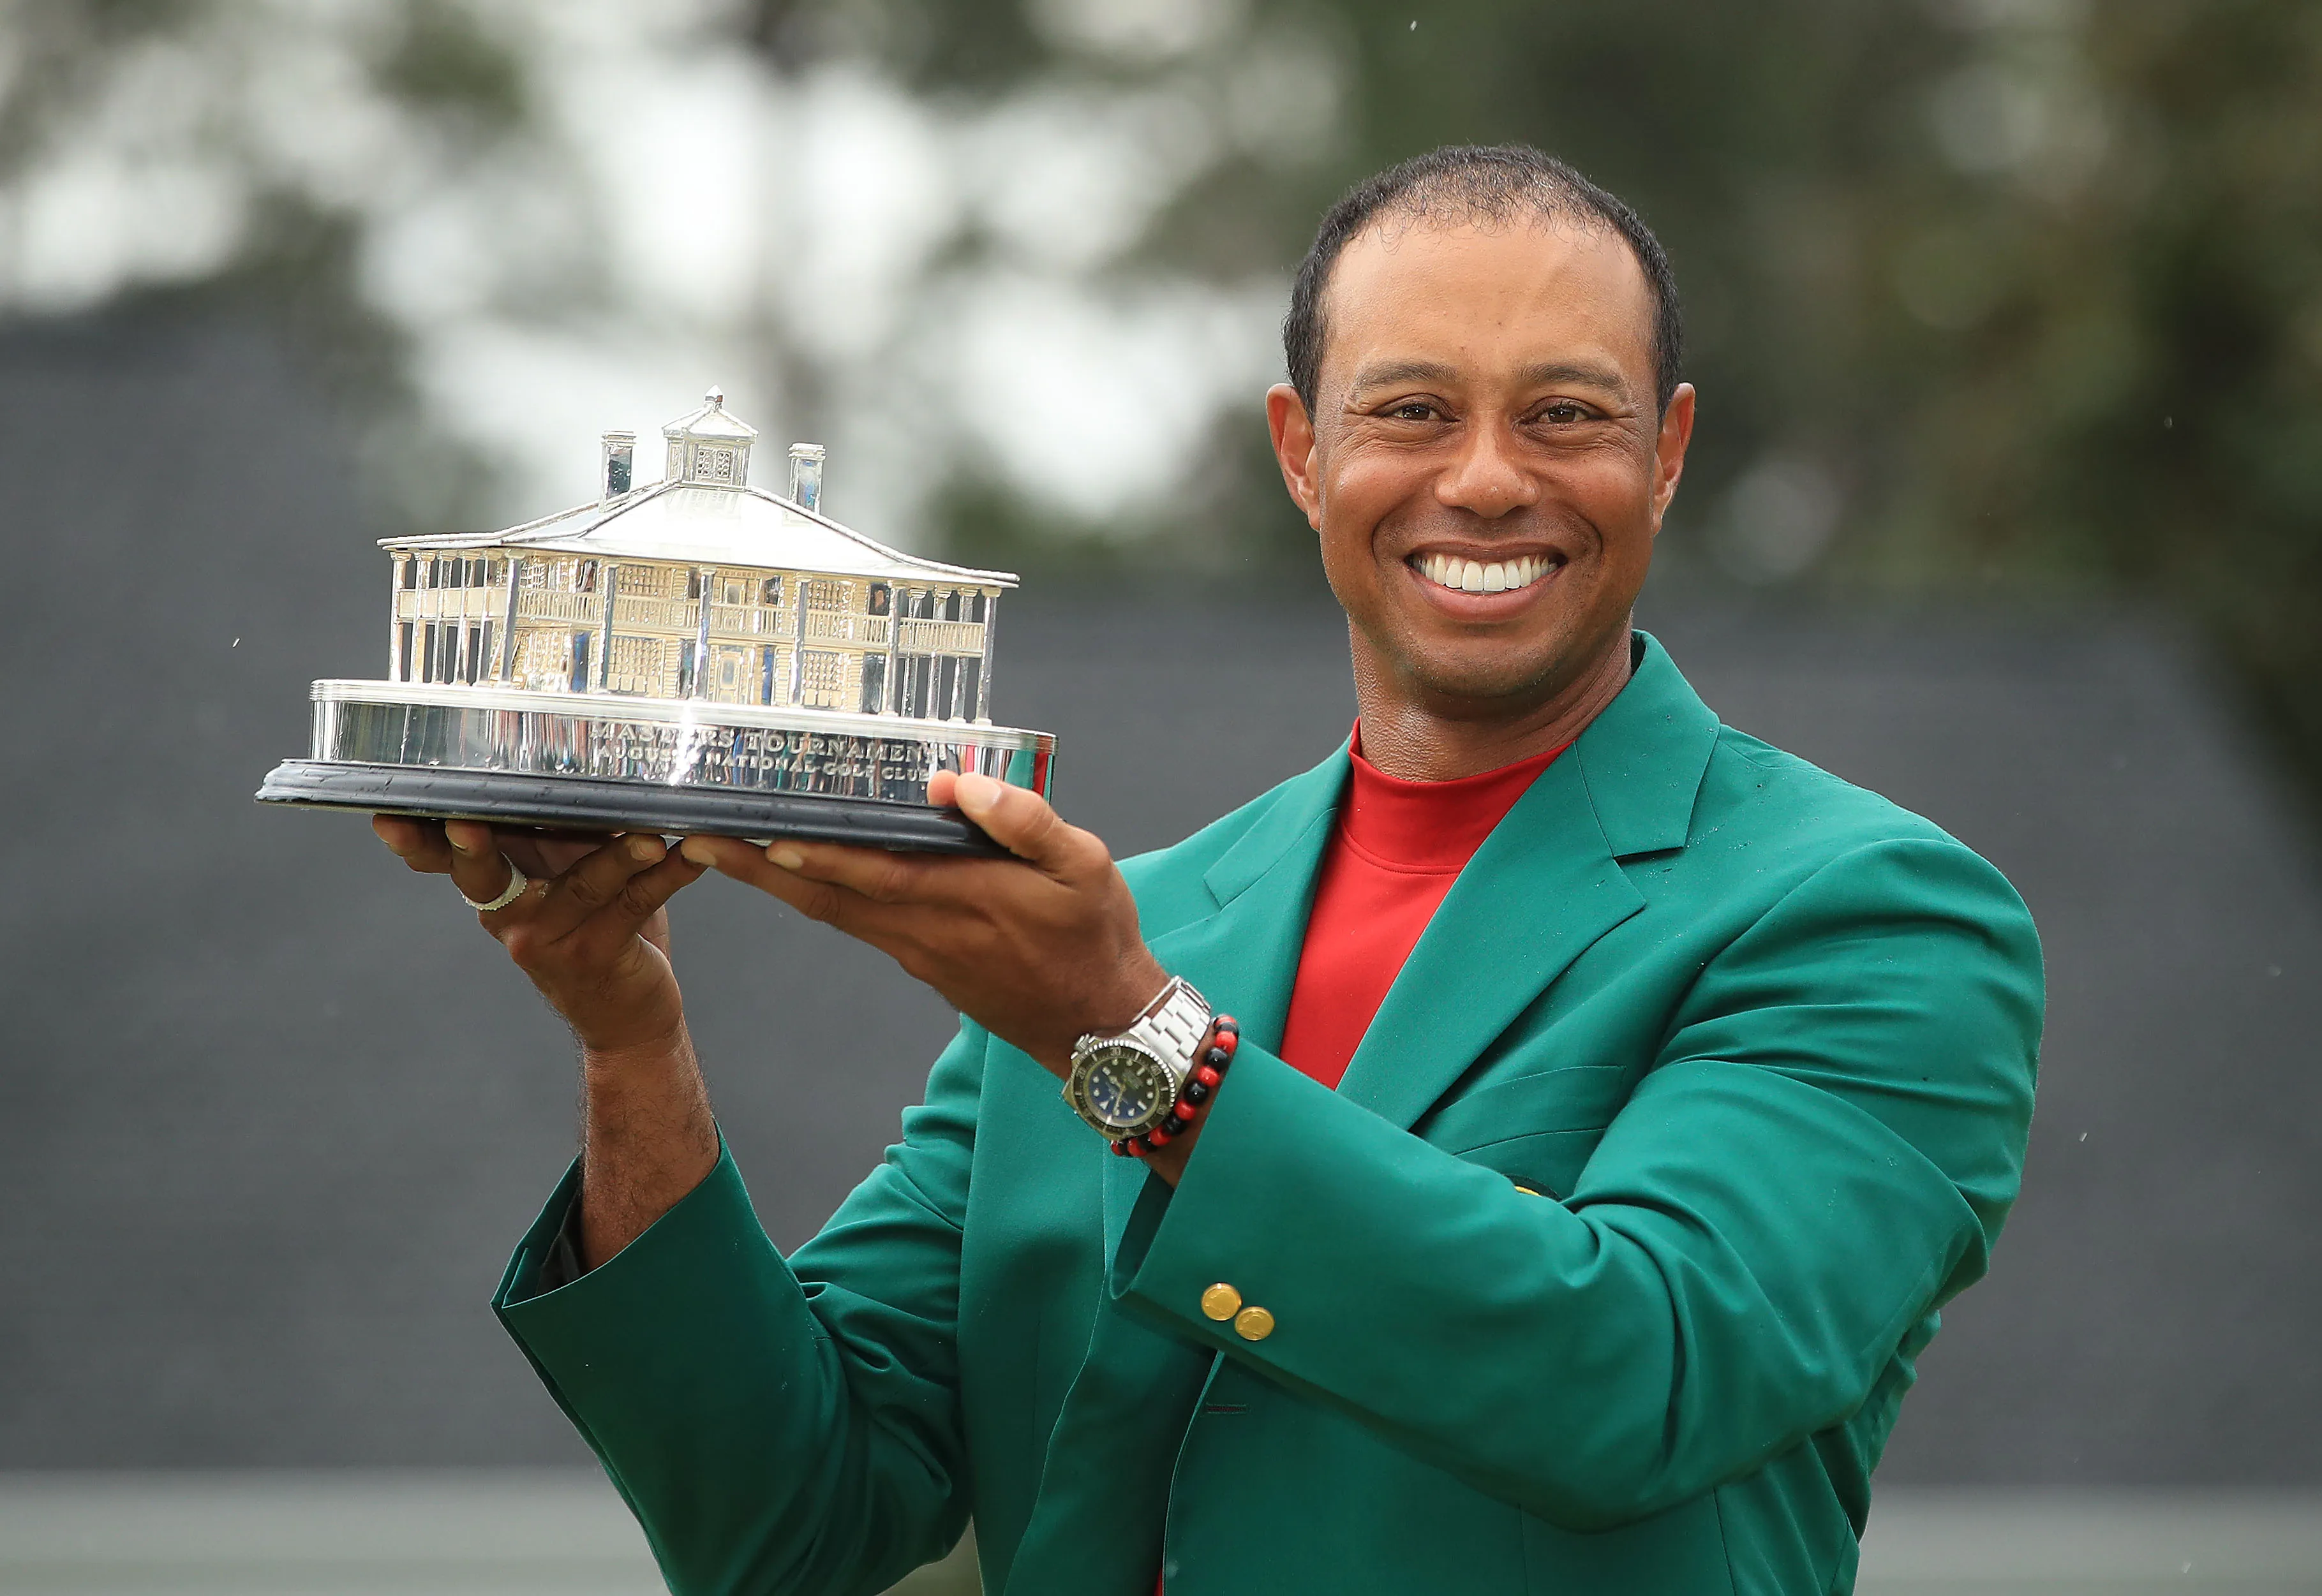 Tiger Woods' net worth: An in-depth look at his wealth after his